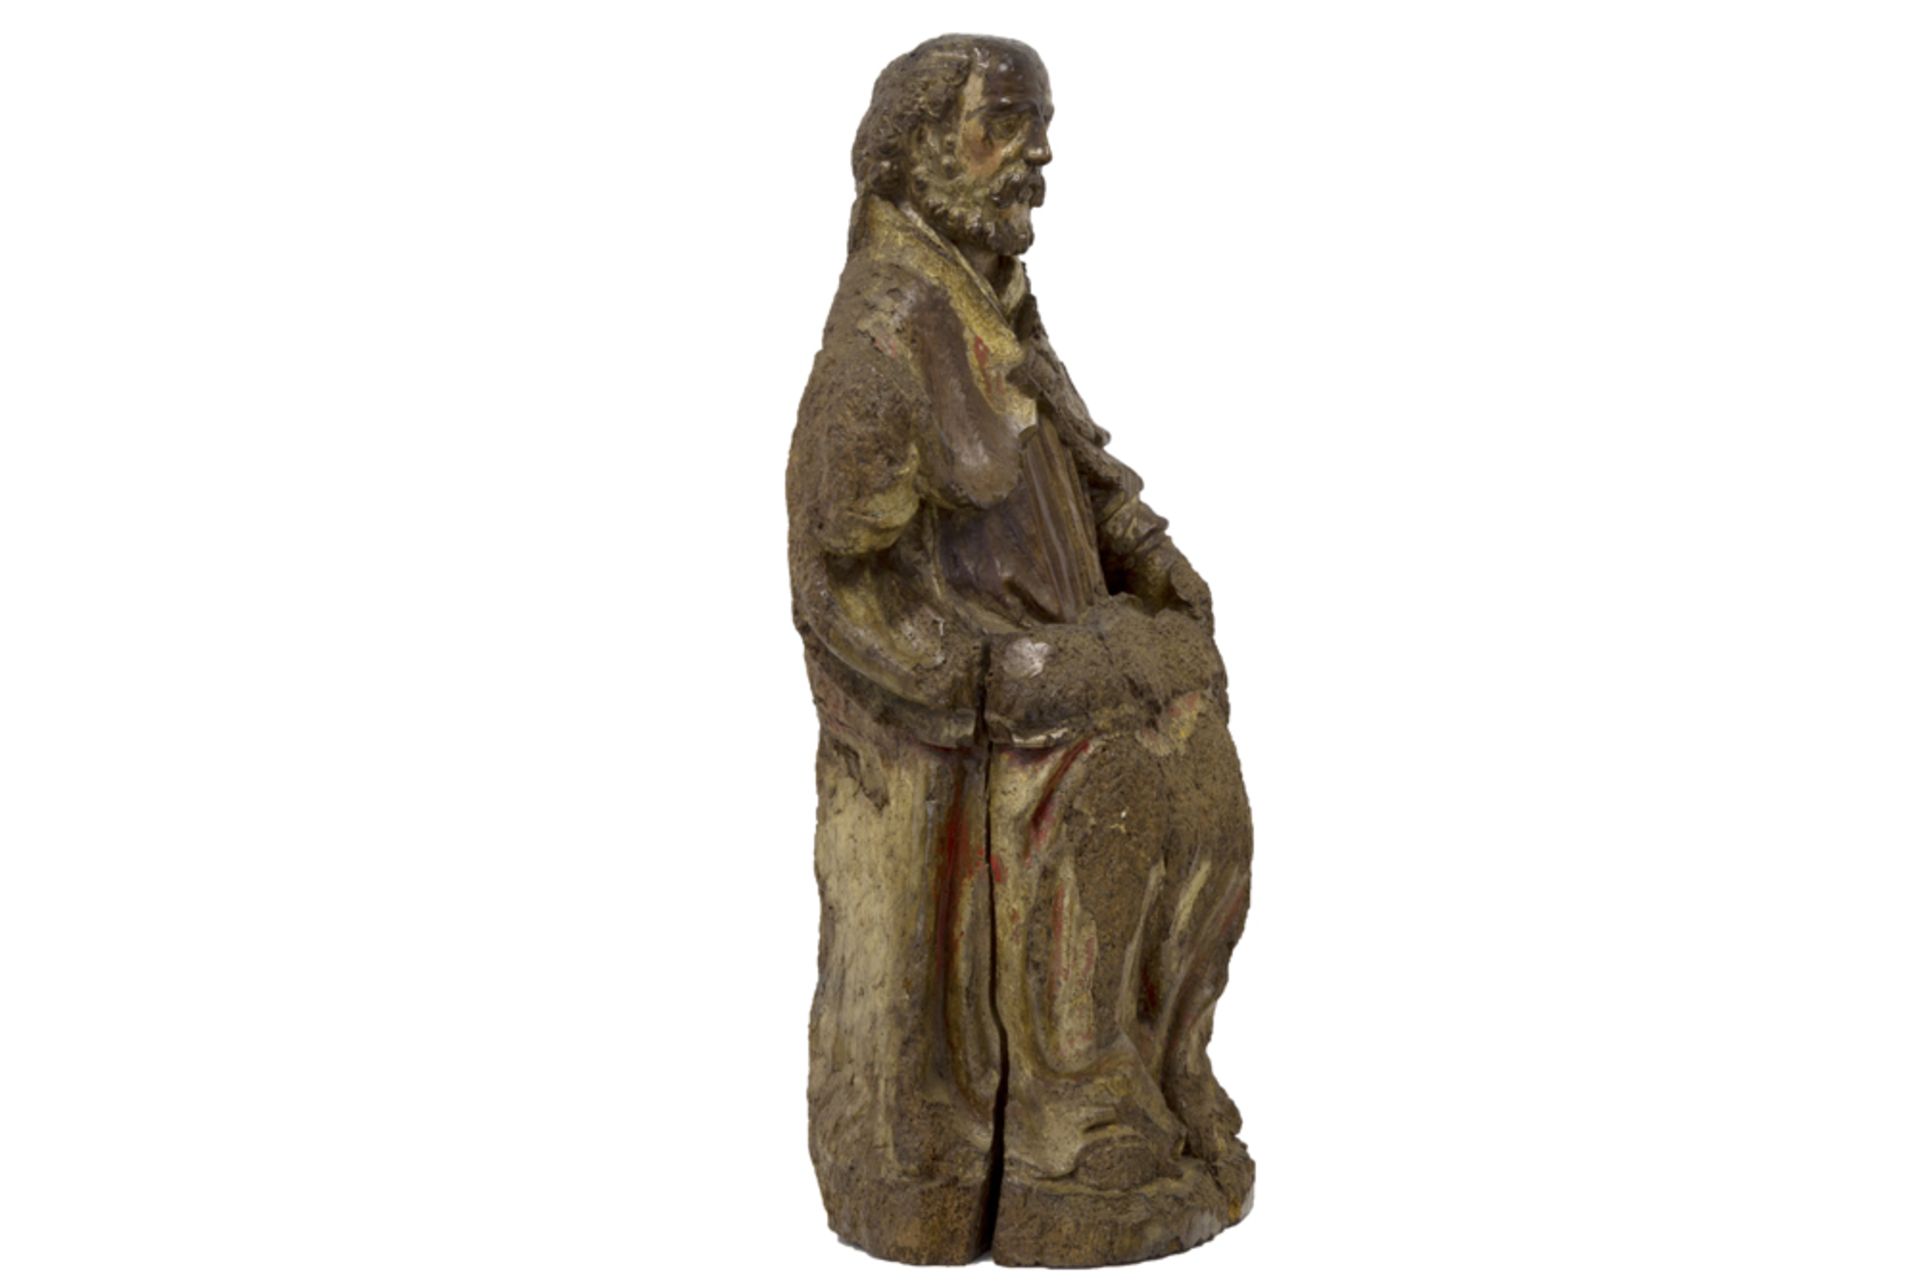 15th Cent. Flemish gothic style sculpture in wood with remains of the original polychromy: " - Image 6 of 6